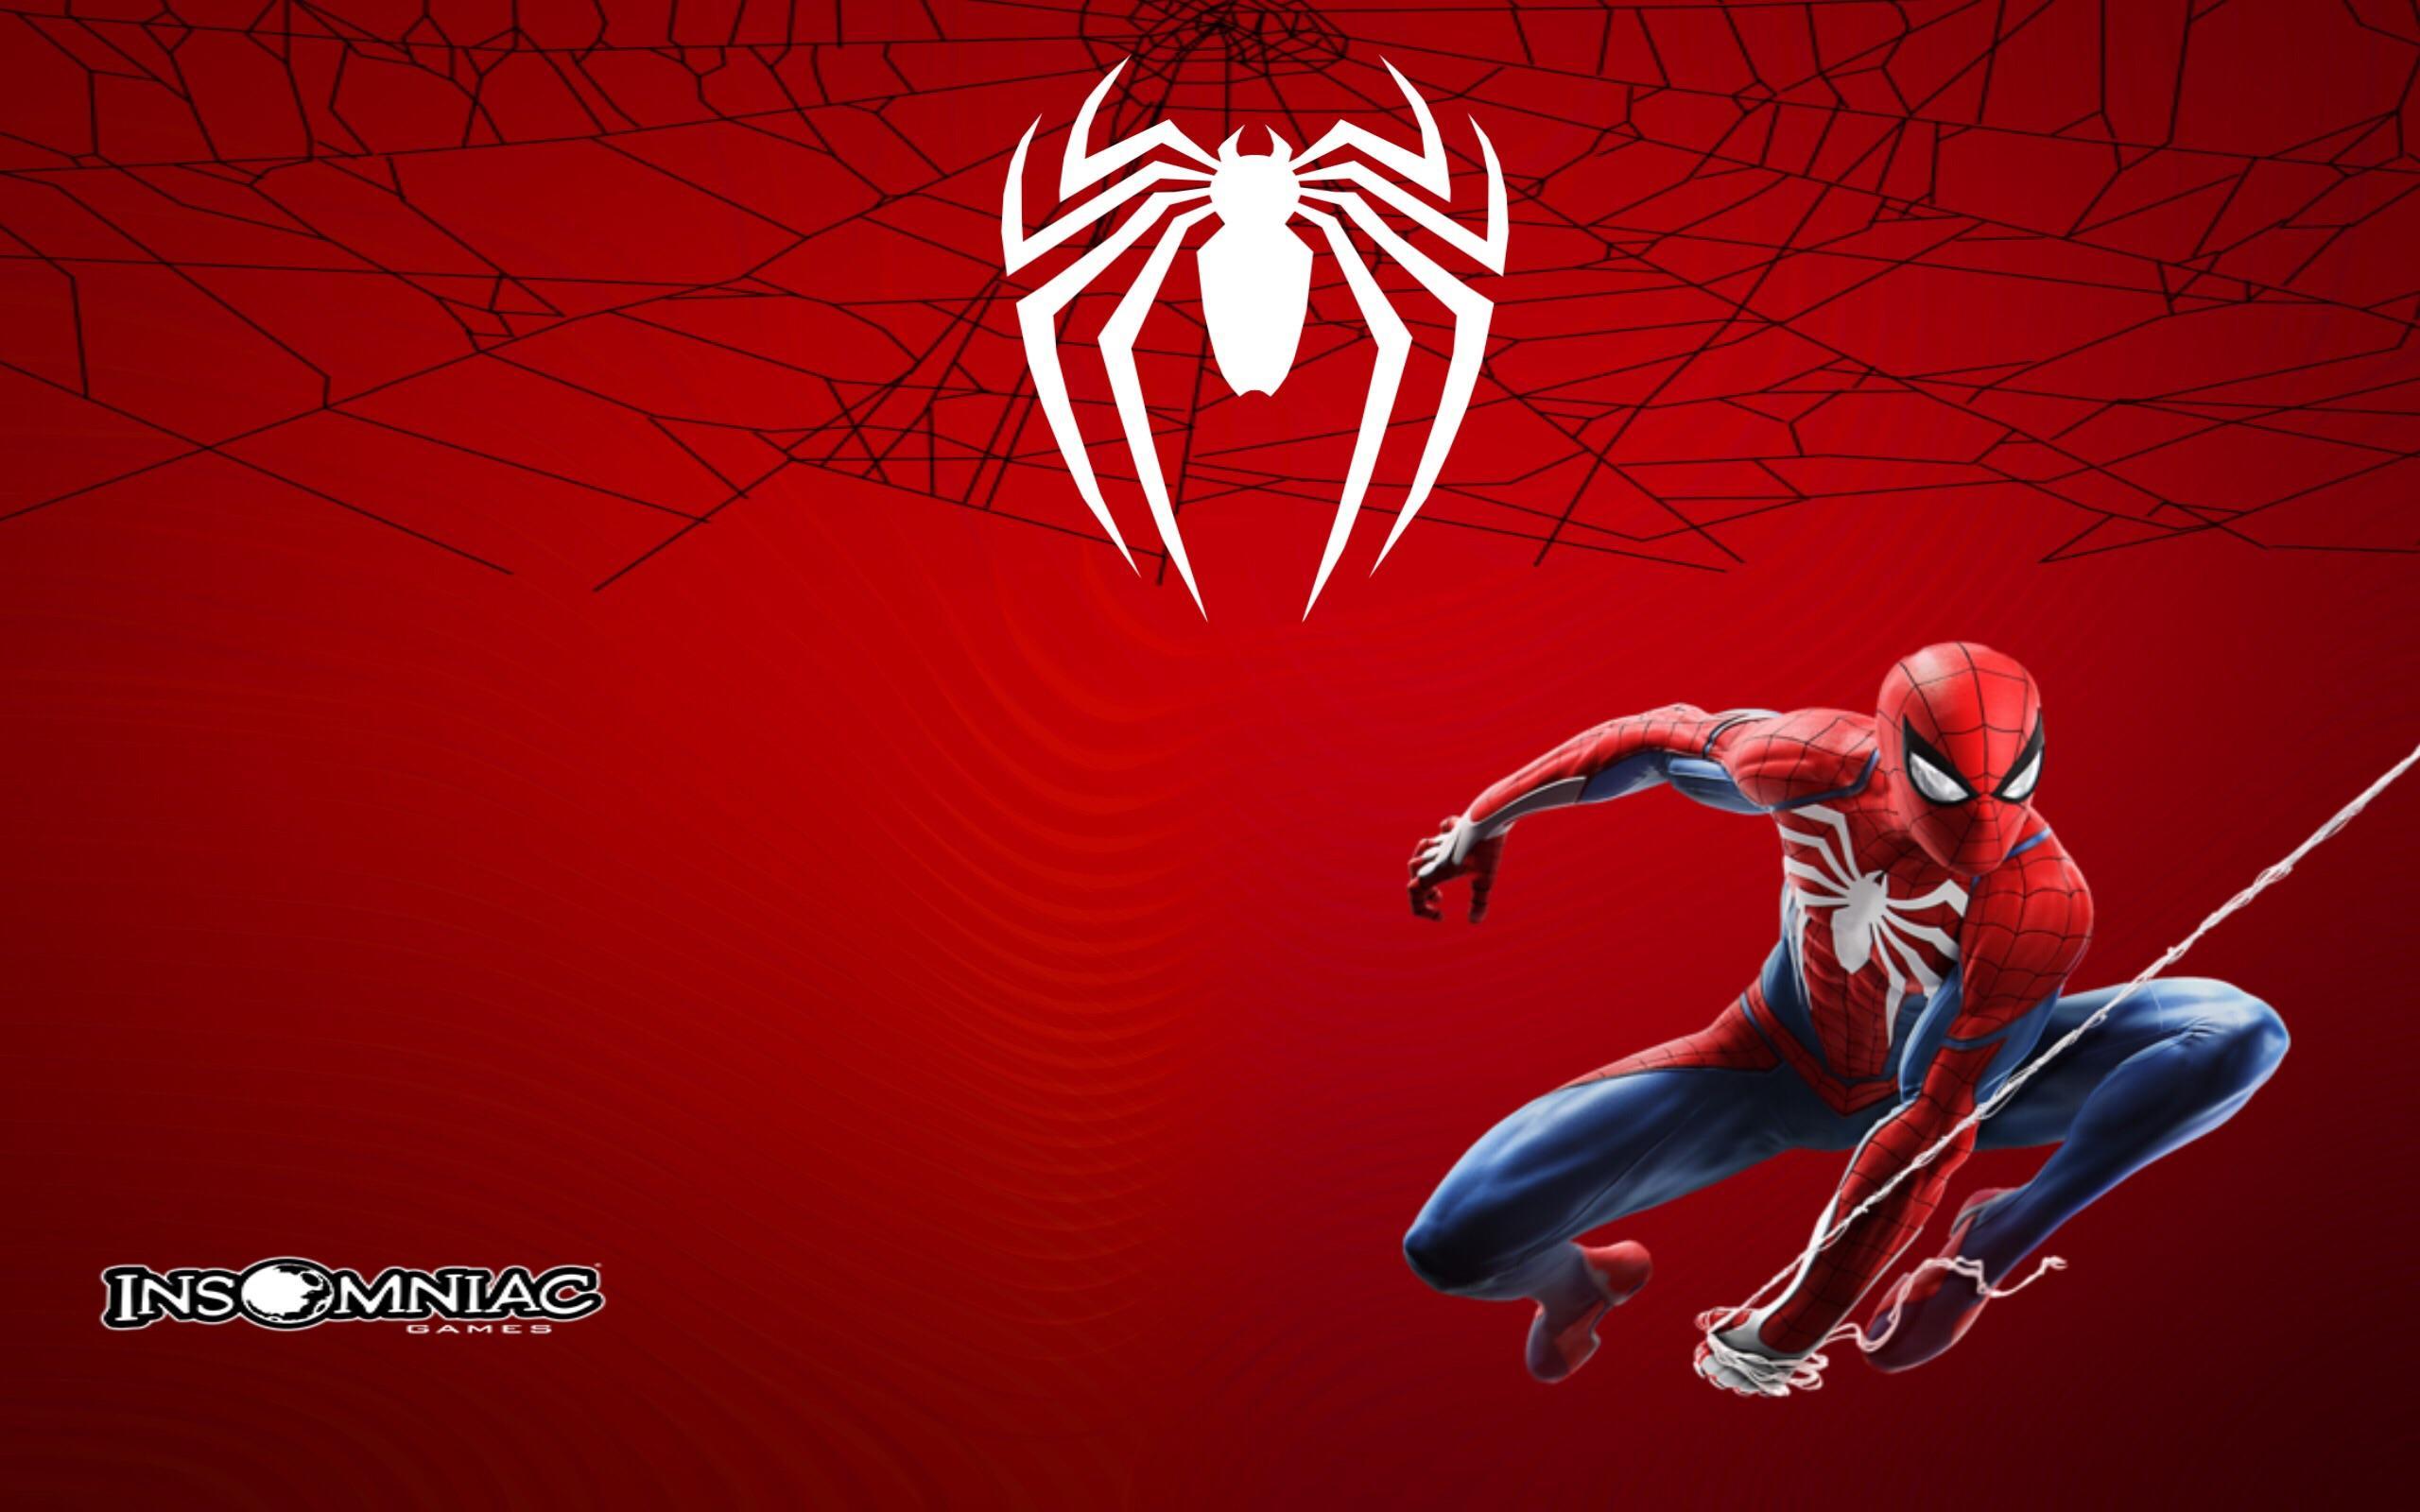 For Anyone Who Wants My Custom Made Ps4 Marvels Spider Man Wallpaper!